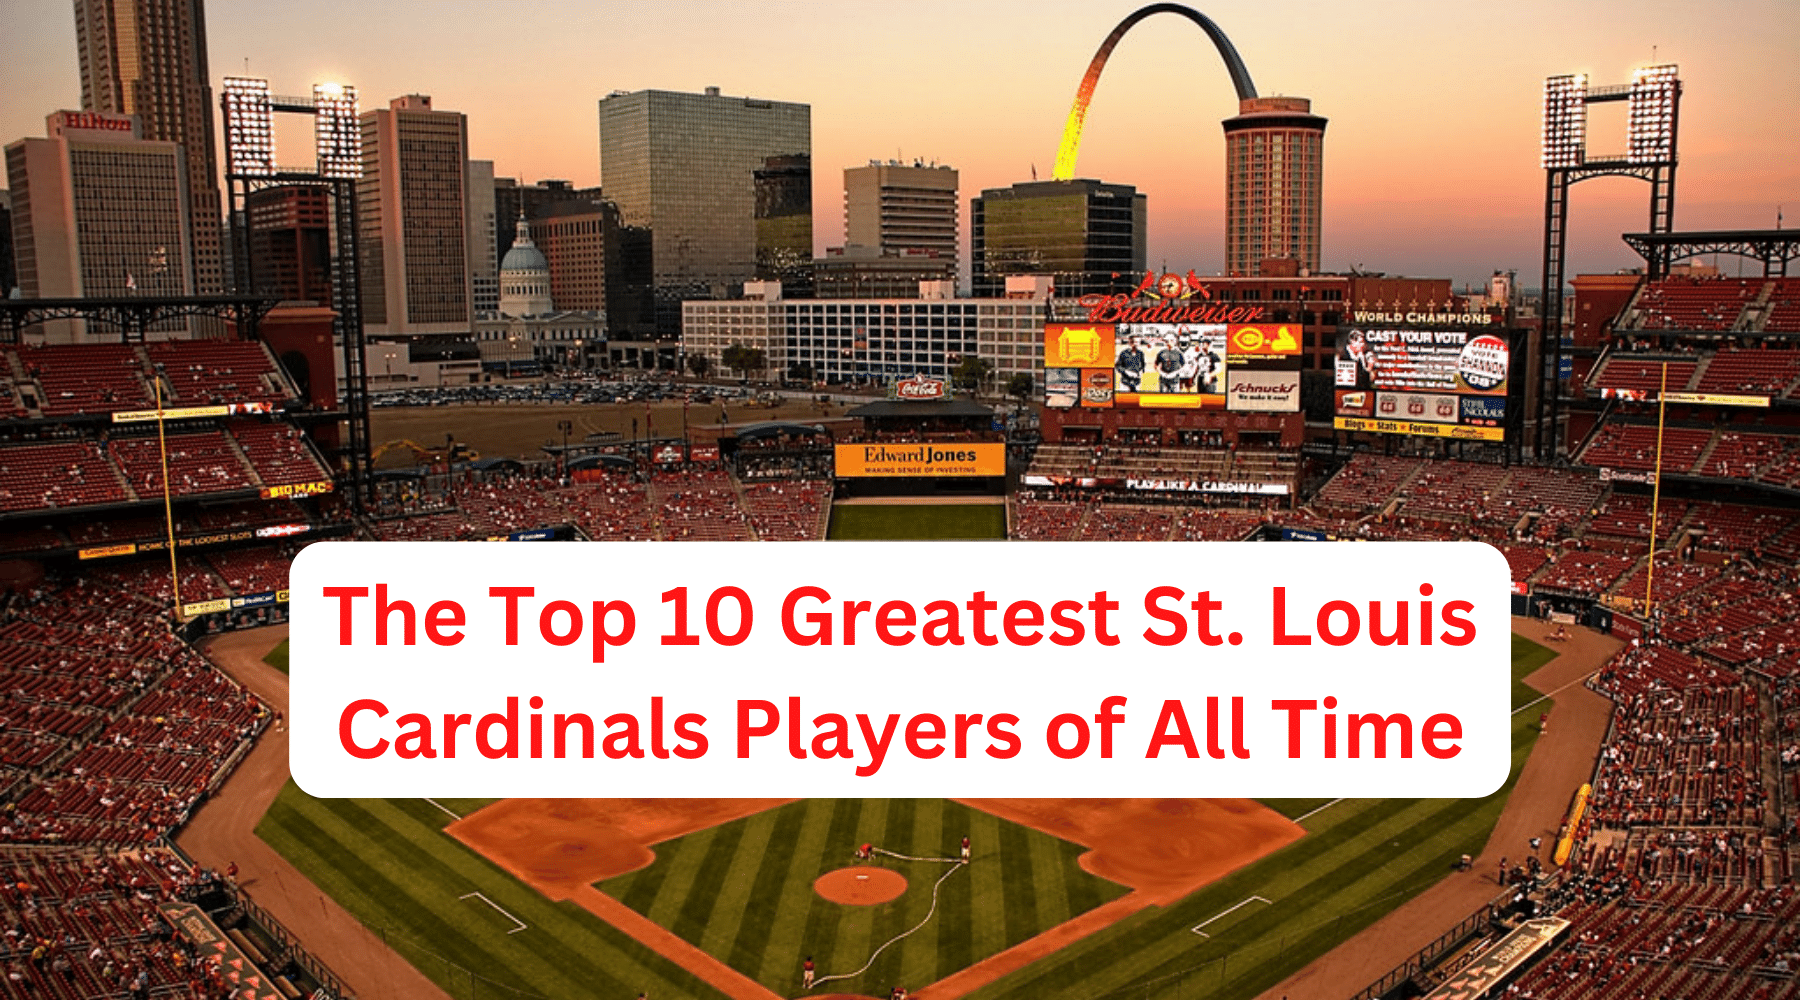 The Top 10 Greatest St. Louis Cardinals Players of All Time